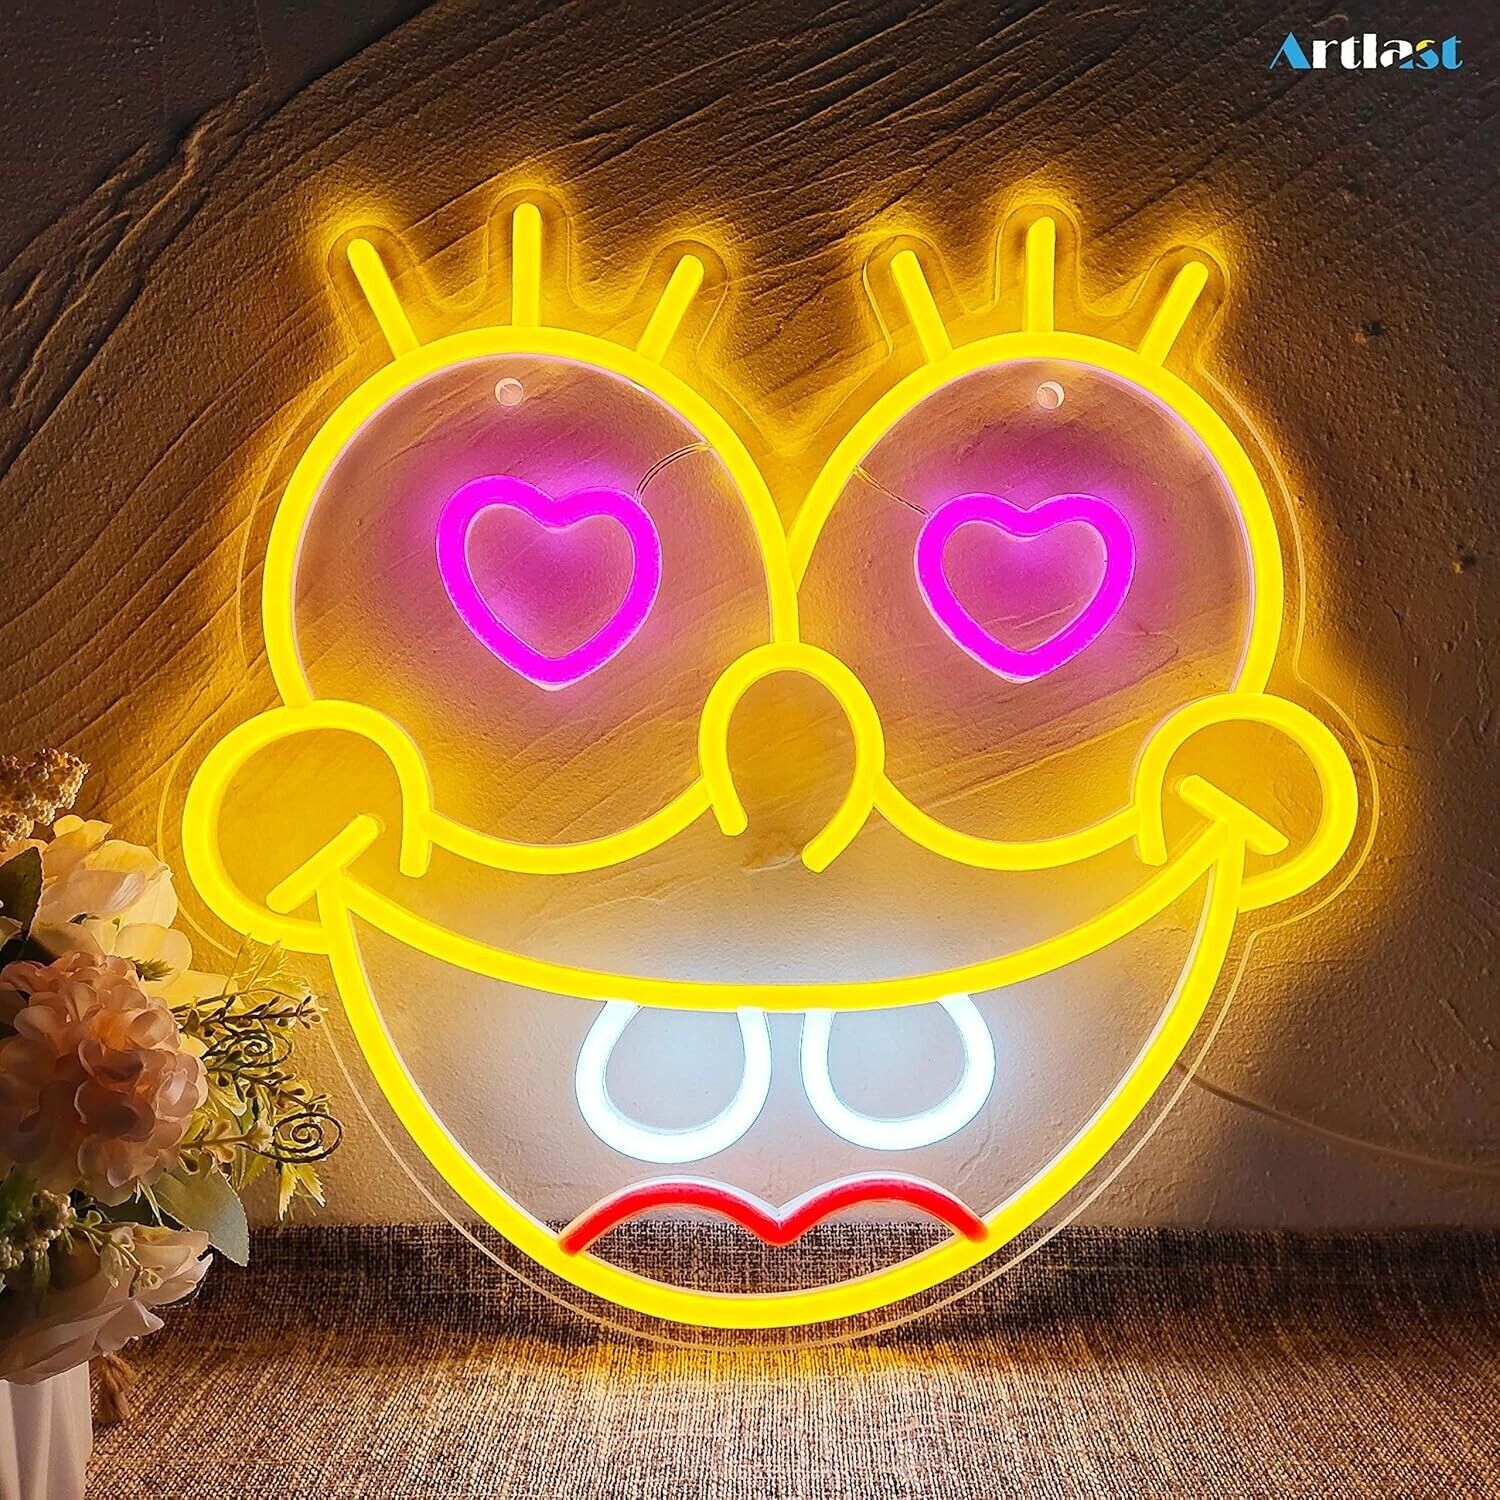 Anime Neon Sign Birthday Gifts Neon Signs LED Neon Light for Teen Room Decor